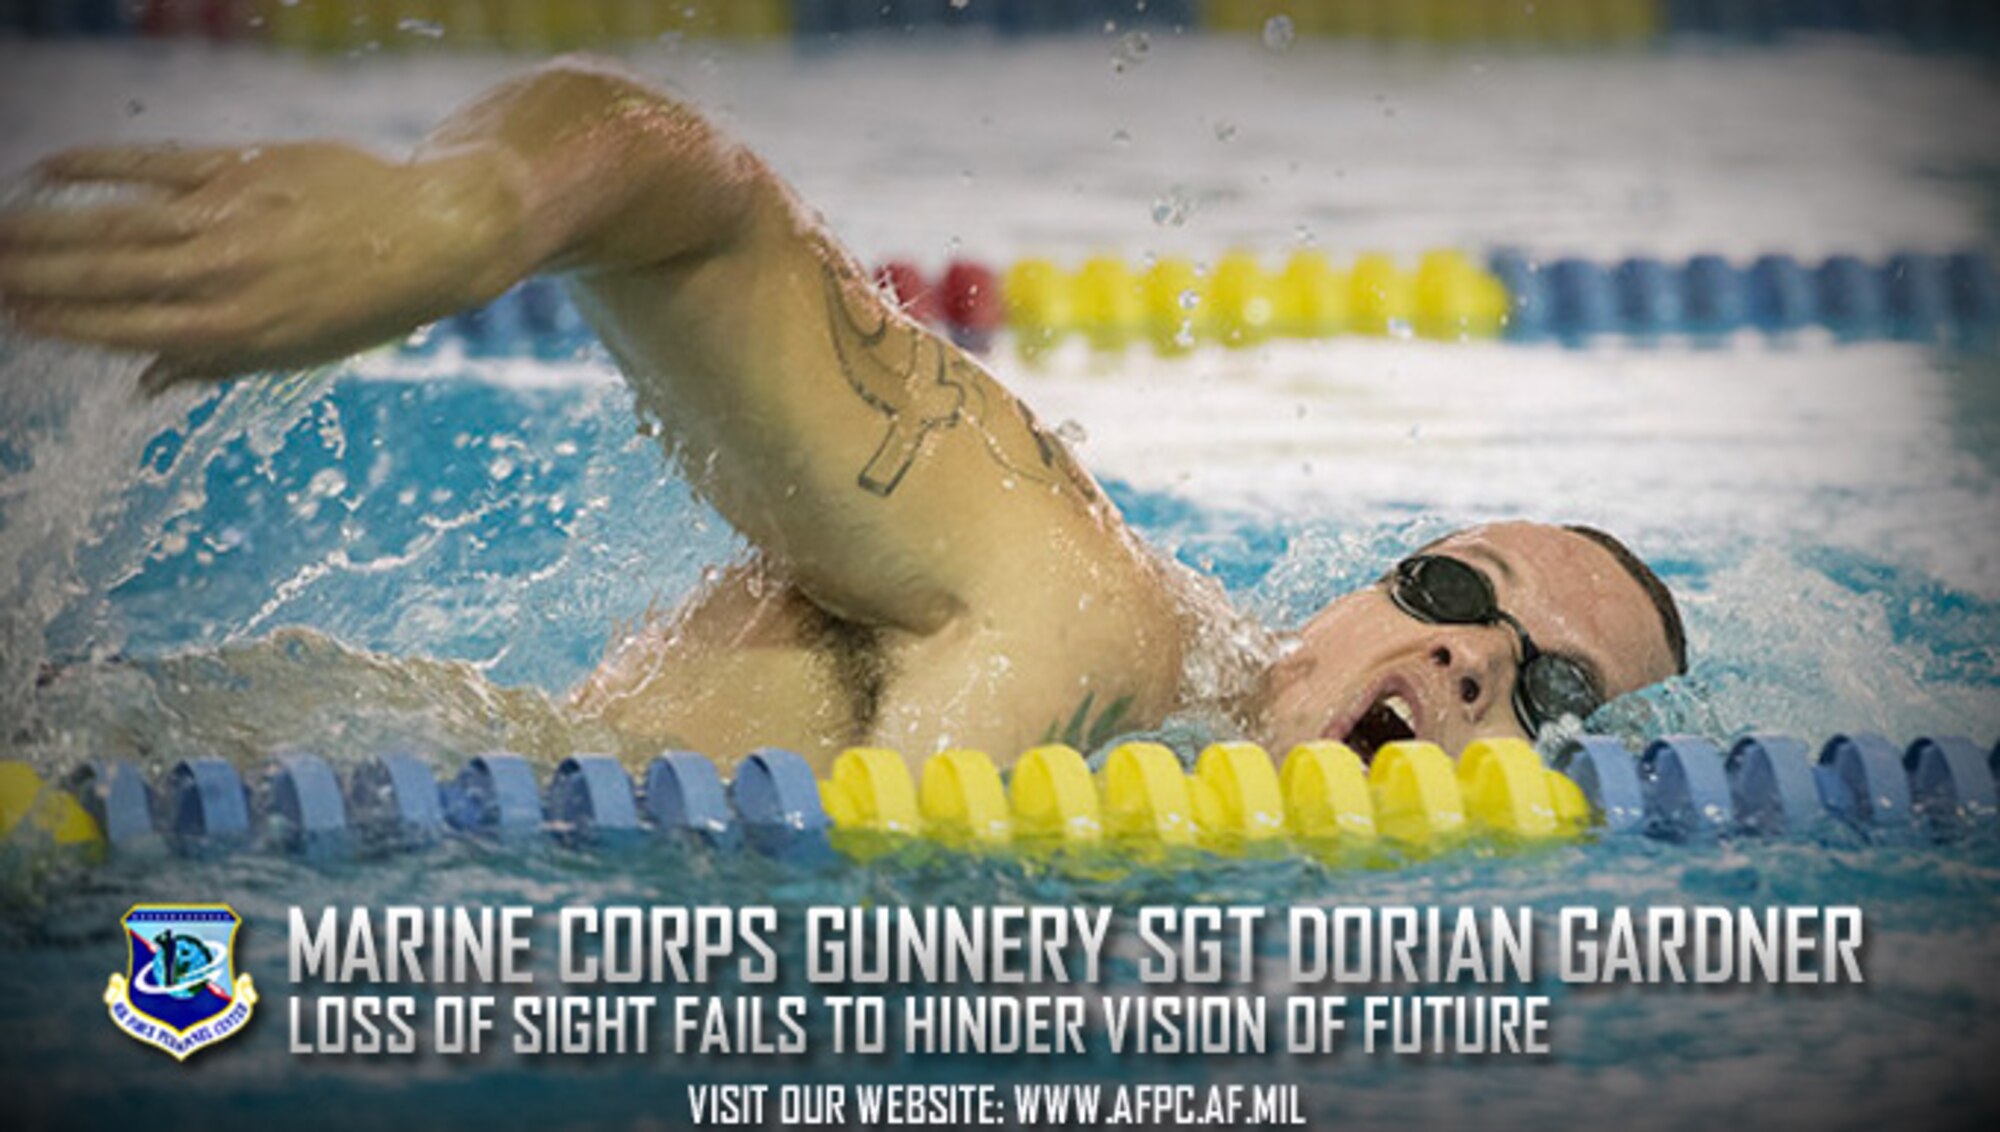 U.S. Marine Corps Gunnery Sgt. Dorian Gardner, training and operations chief with the Headquarters U.S. Marine Corps Training Command Public Affairs office, practices his starts during swimming practice for the 2017 Invictus Games in Toronto, Canada, Sept. 22, 2017. The Invictus Games were established by Prince Harry of Wales in 2014, and have brought together wounded and injured veterans from 17 nations to compete across 12 adaptive sporting events. (U.S. Army photo by Pfc. Seara Marcsis)